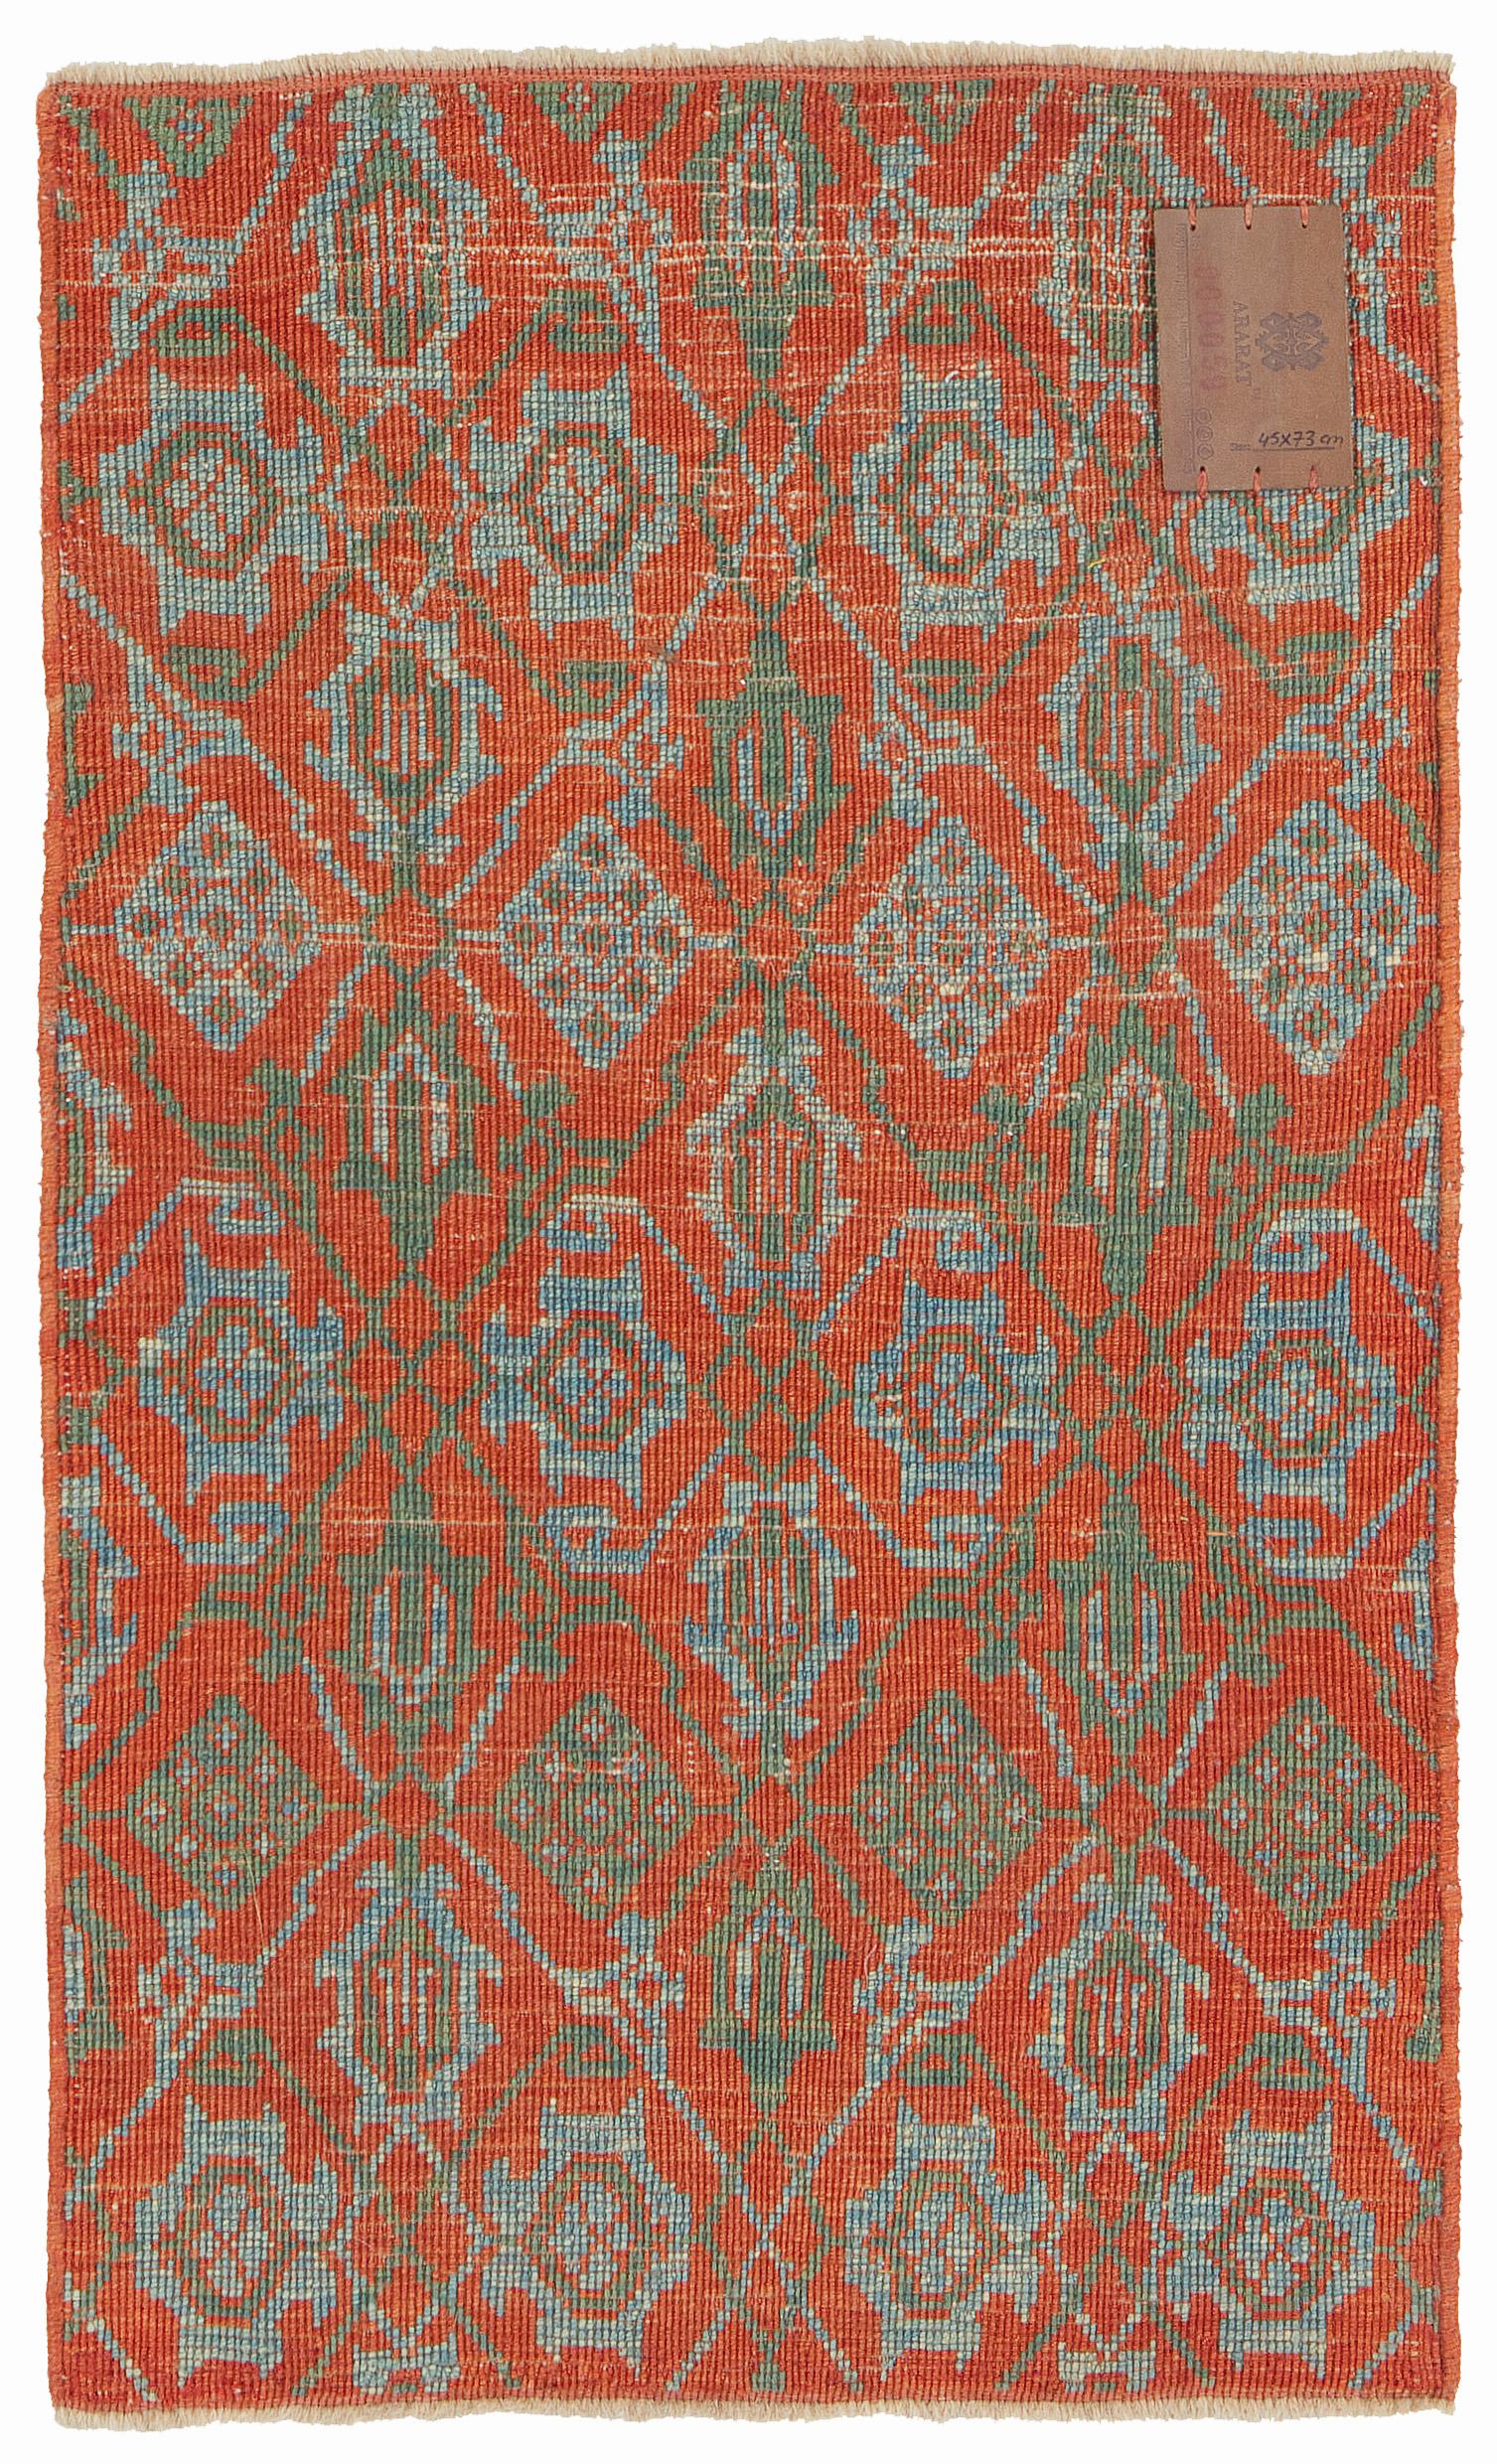 Ararat Rugs Mamluk Wagireh Rug Lattice Pattern Revival Carpet Natural Dyed In New Condition For Sale In Tokyo, JP